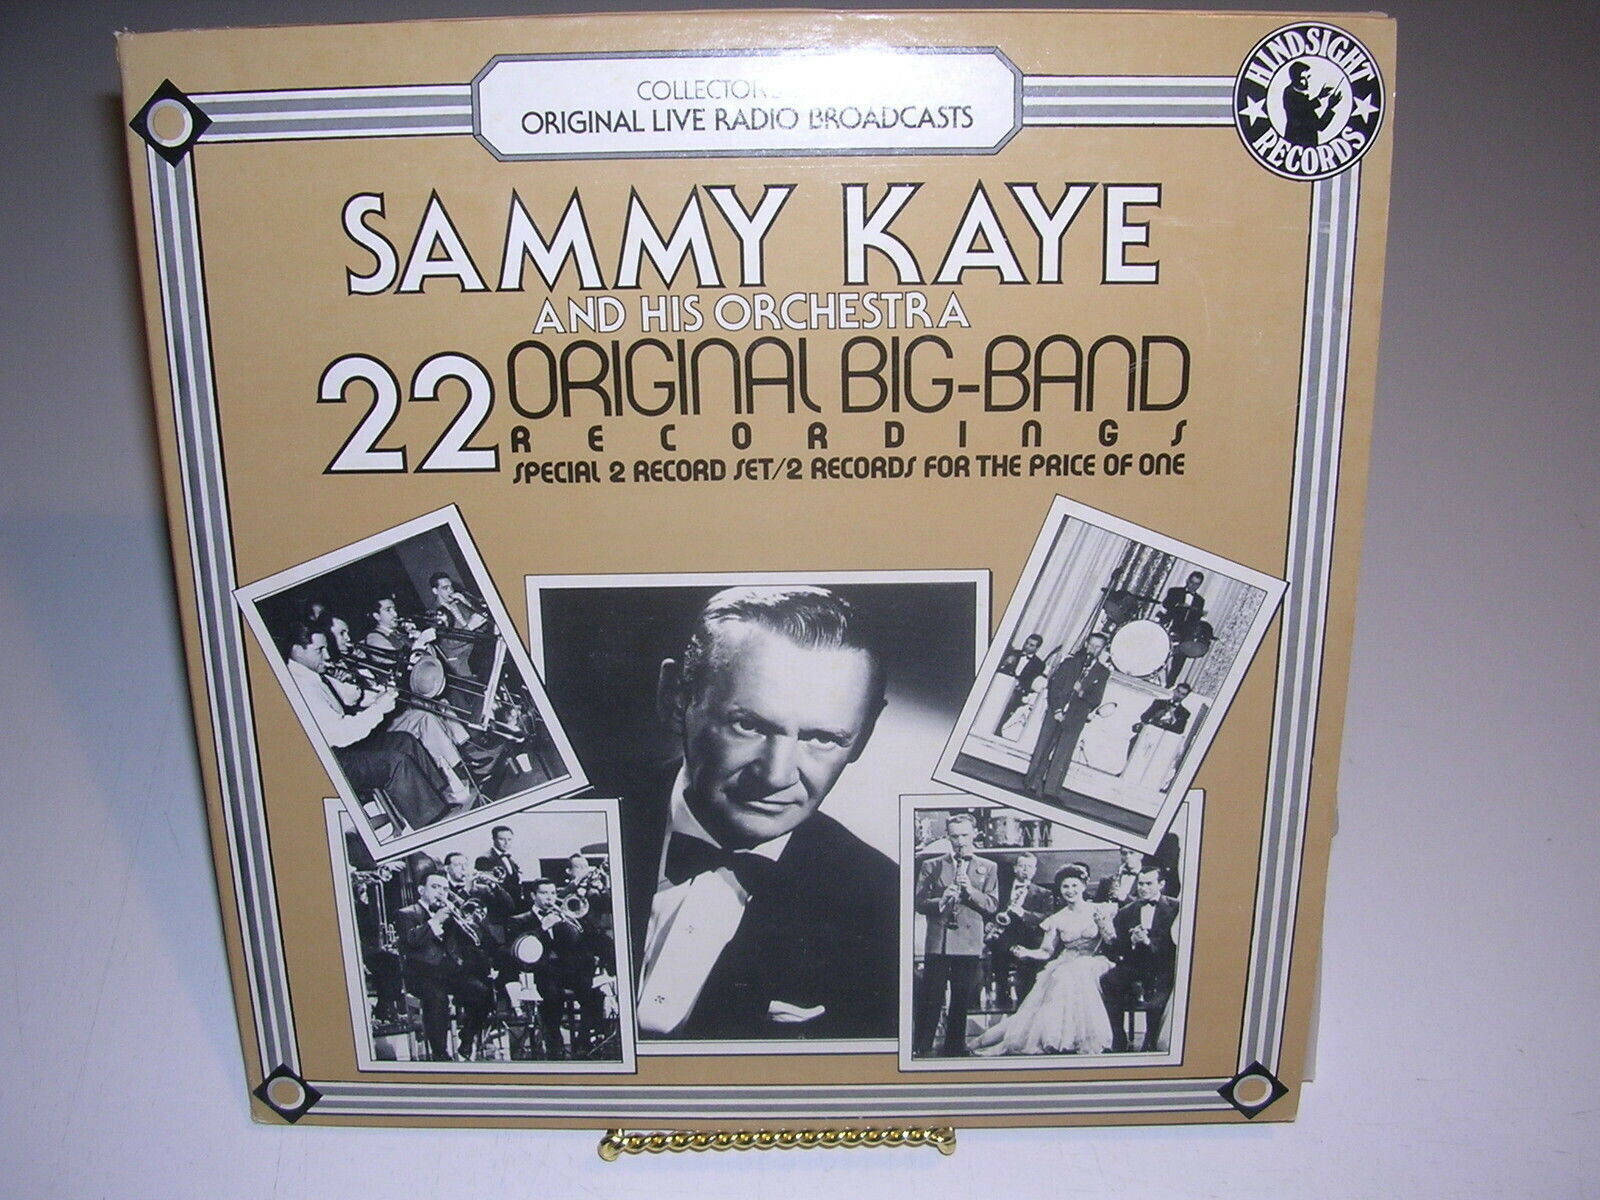 Sammy Kaye And His Orchestra Vinyl Cover Wallpaper